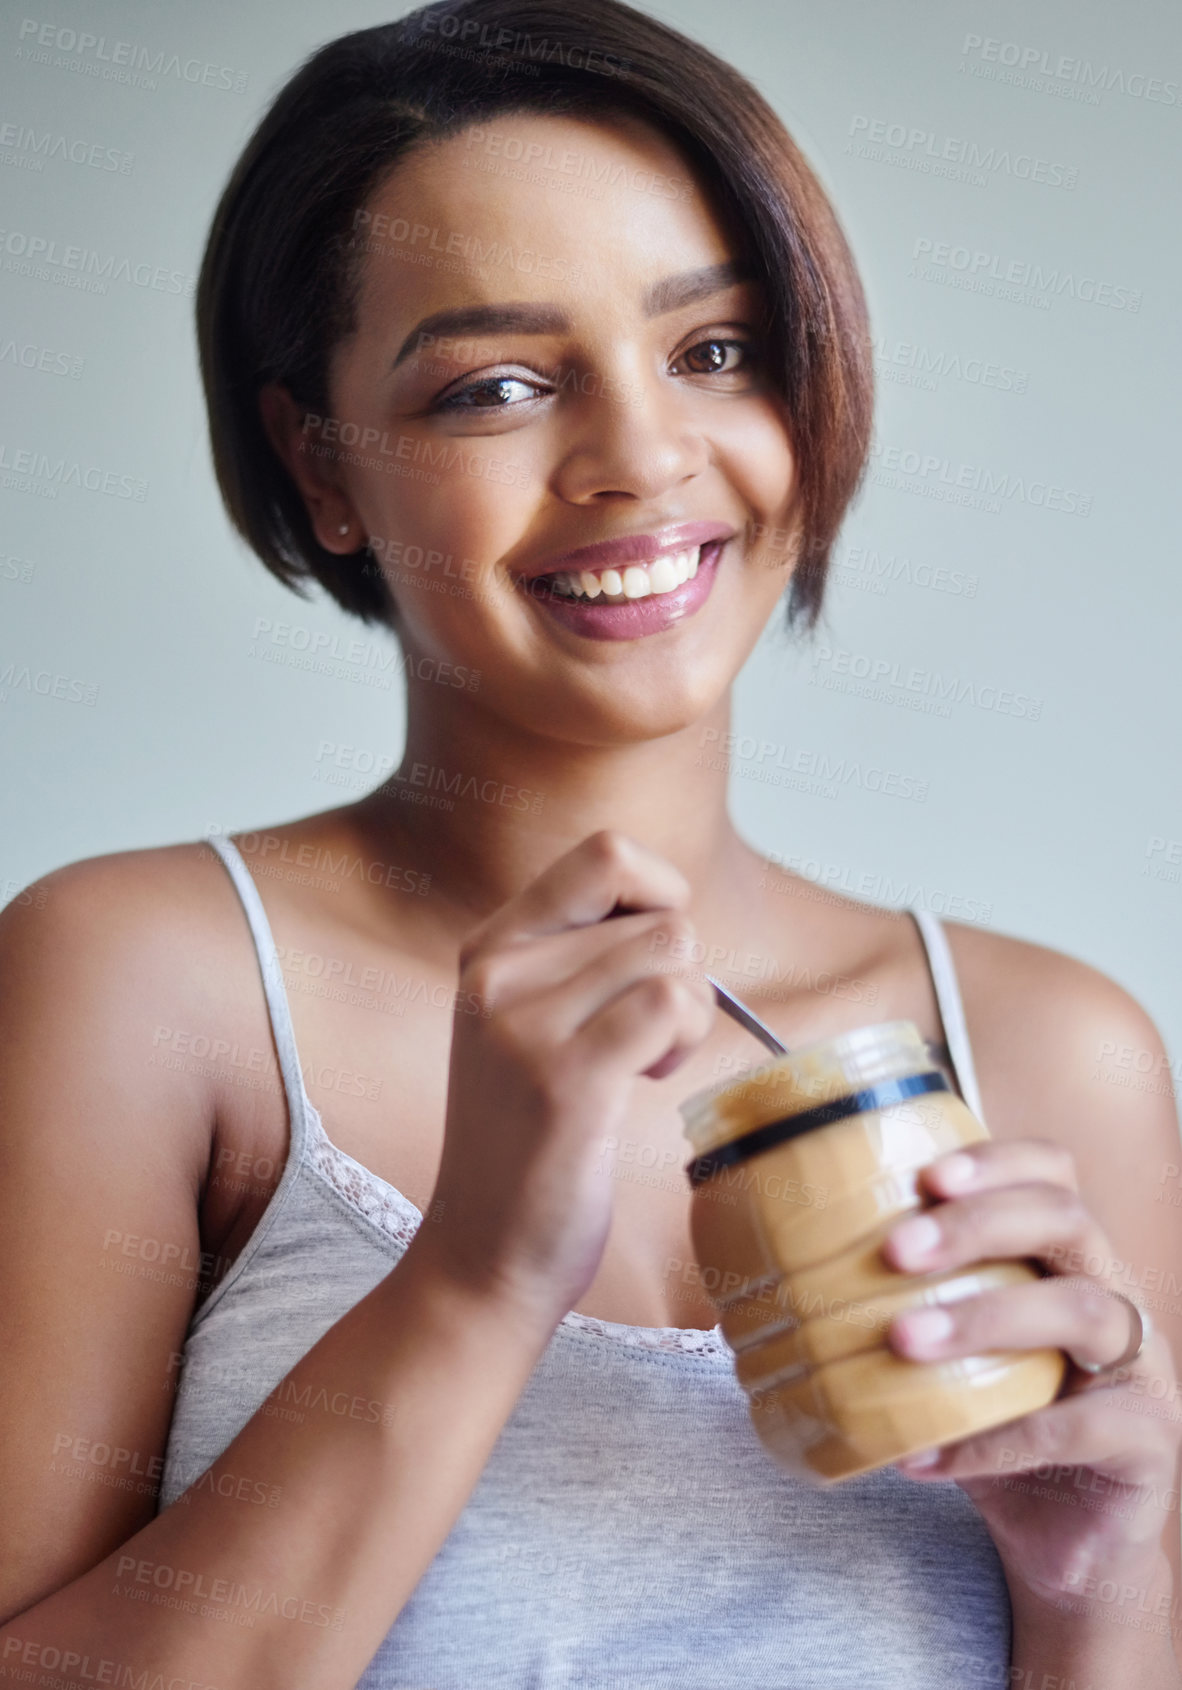 Buy stock photo Studio shot of an attractive young woman eating from a jar of peanut butter against a gray background